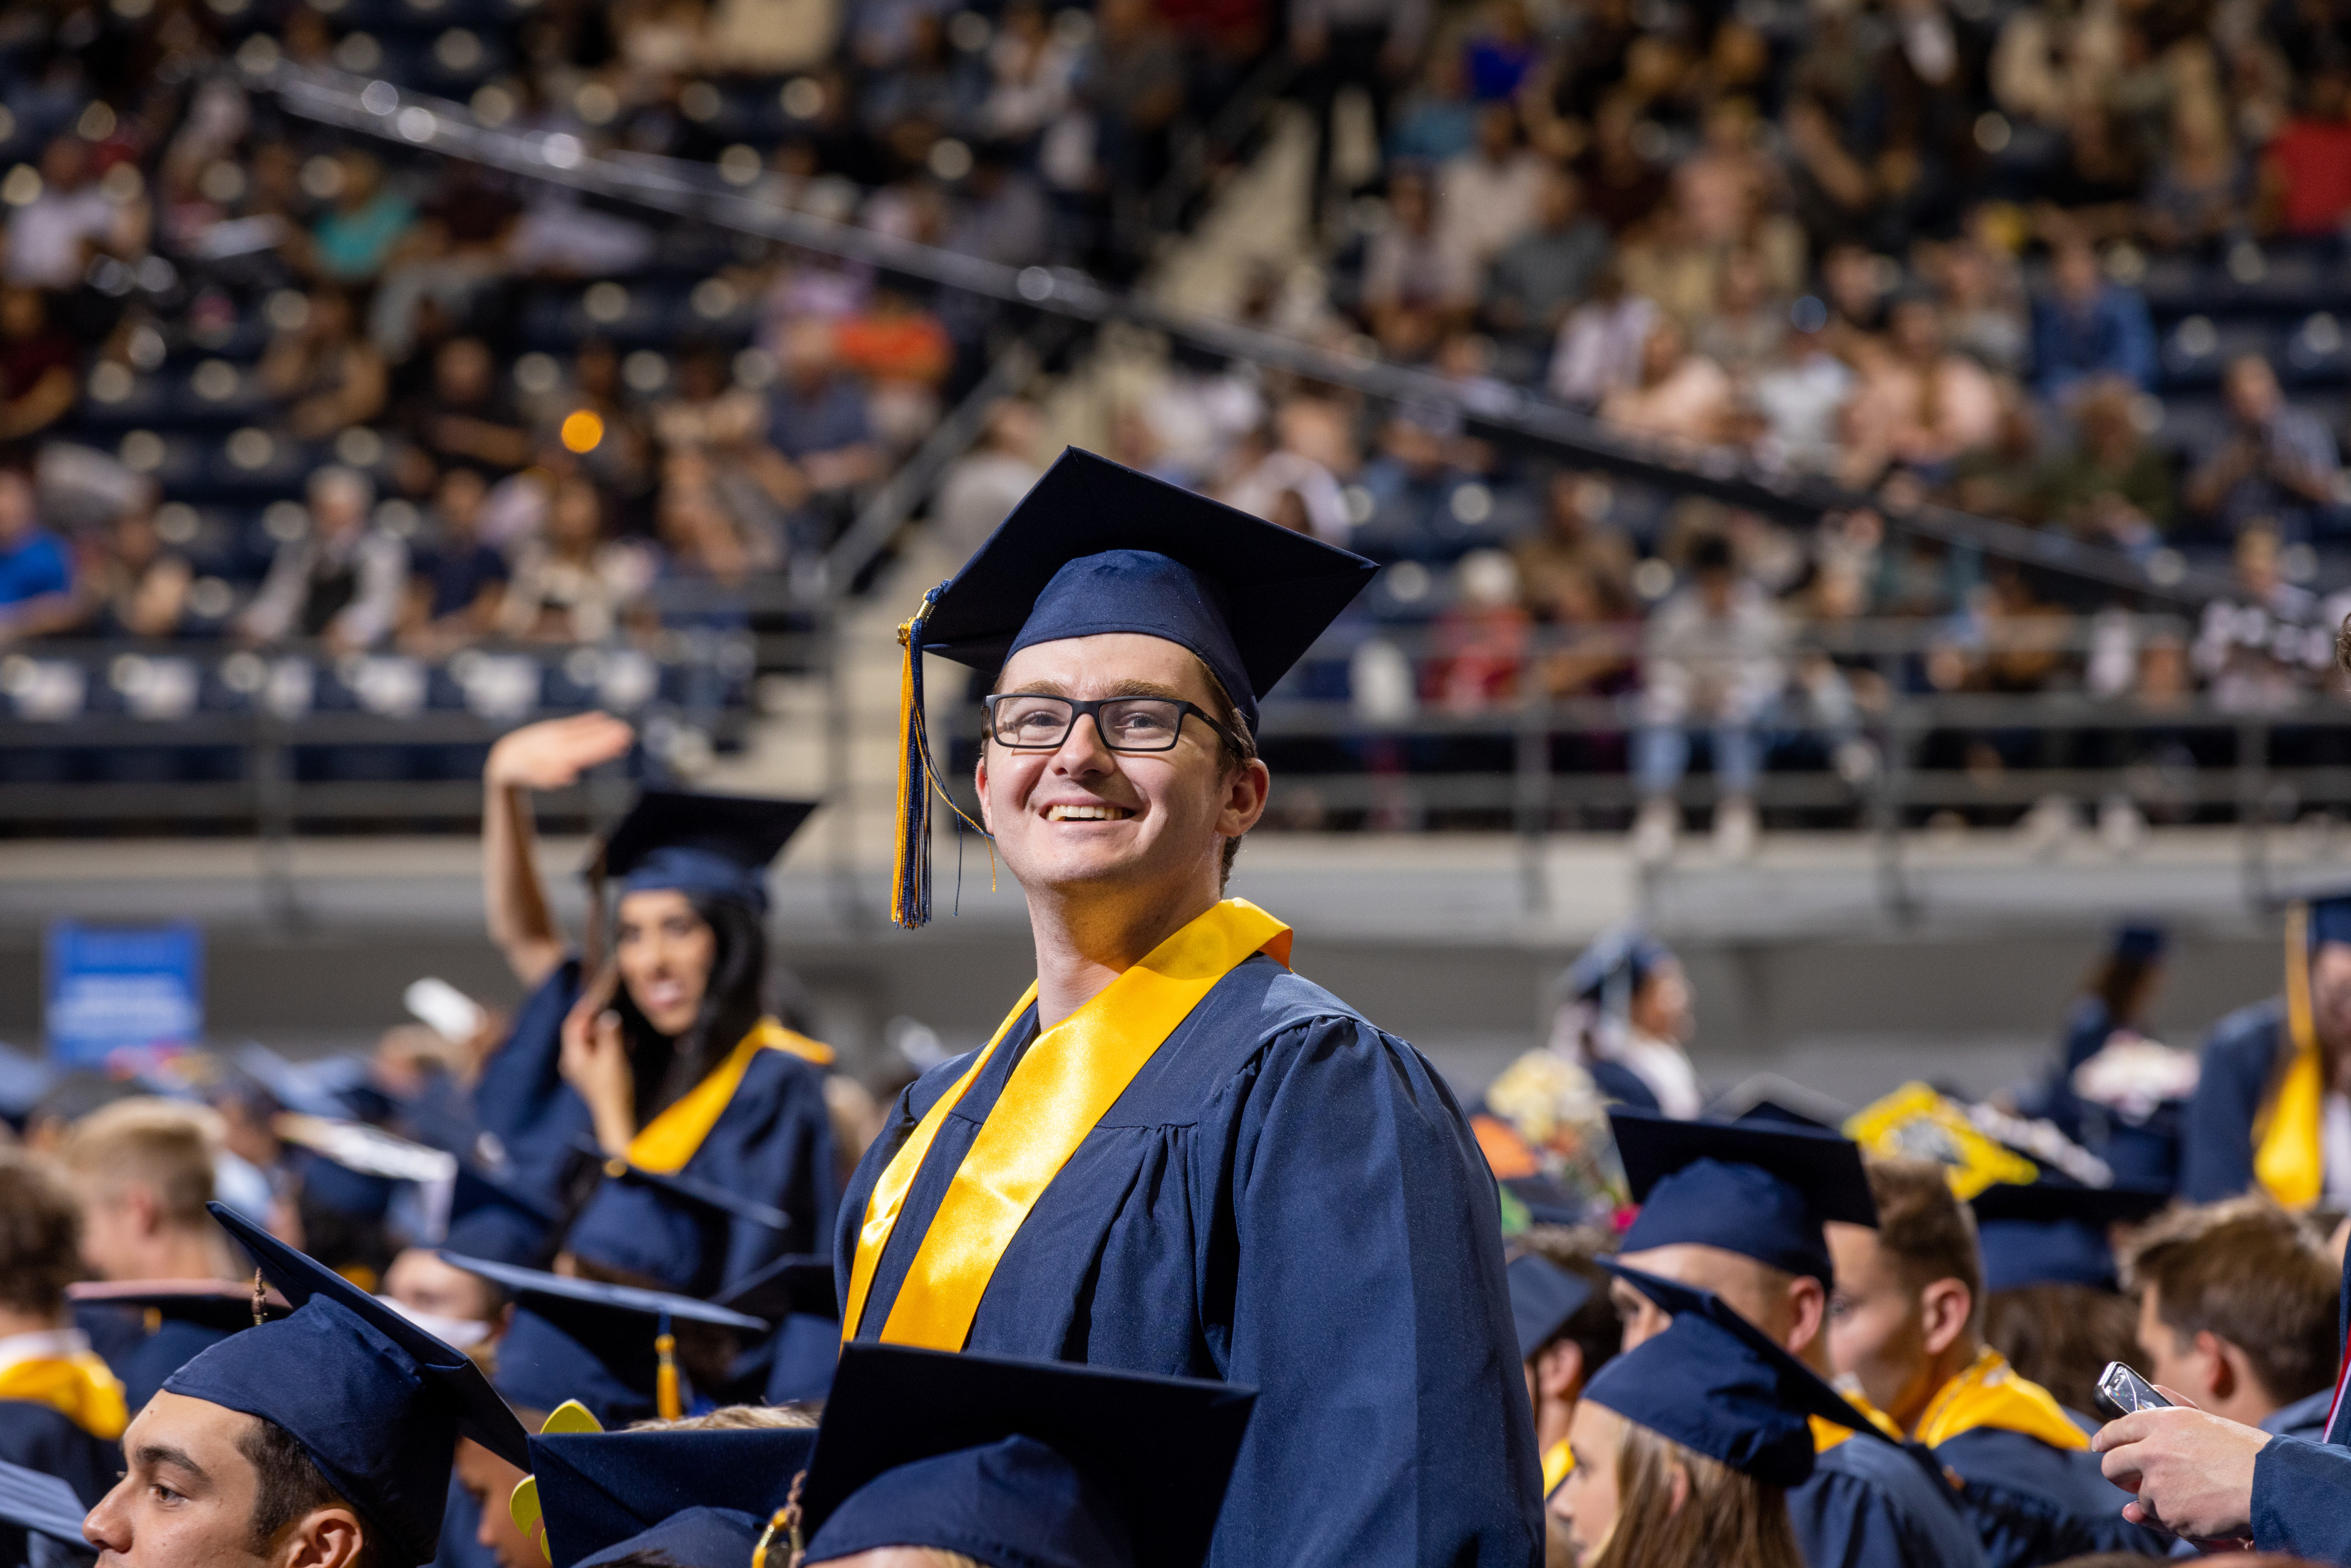 NAU graduate smiling in graduation regalia while other graduates sit waiting for the commencement ceremony to begin.